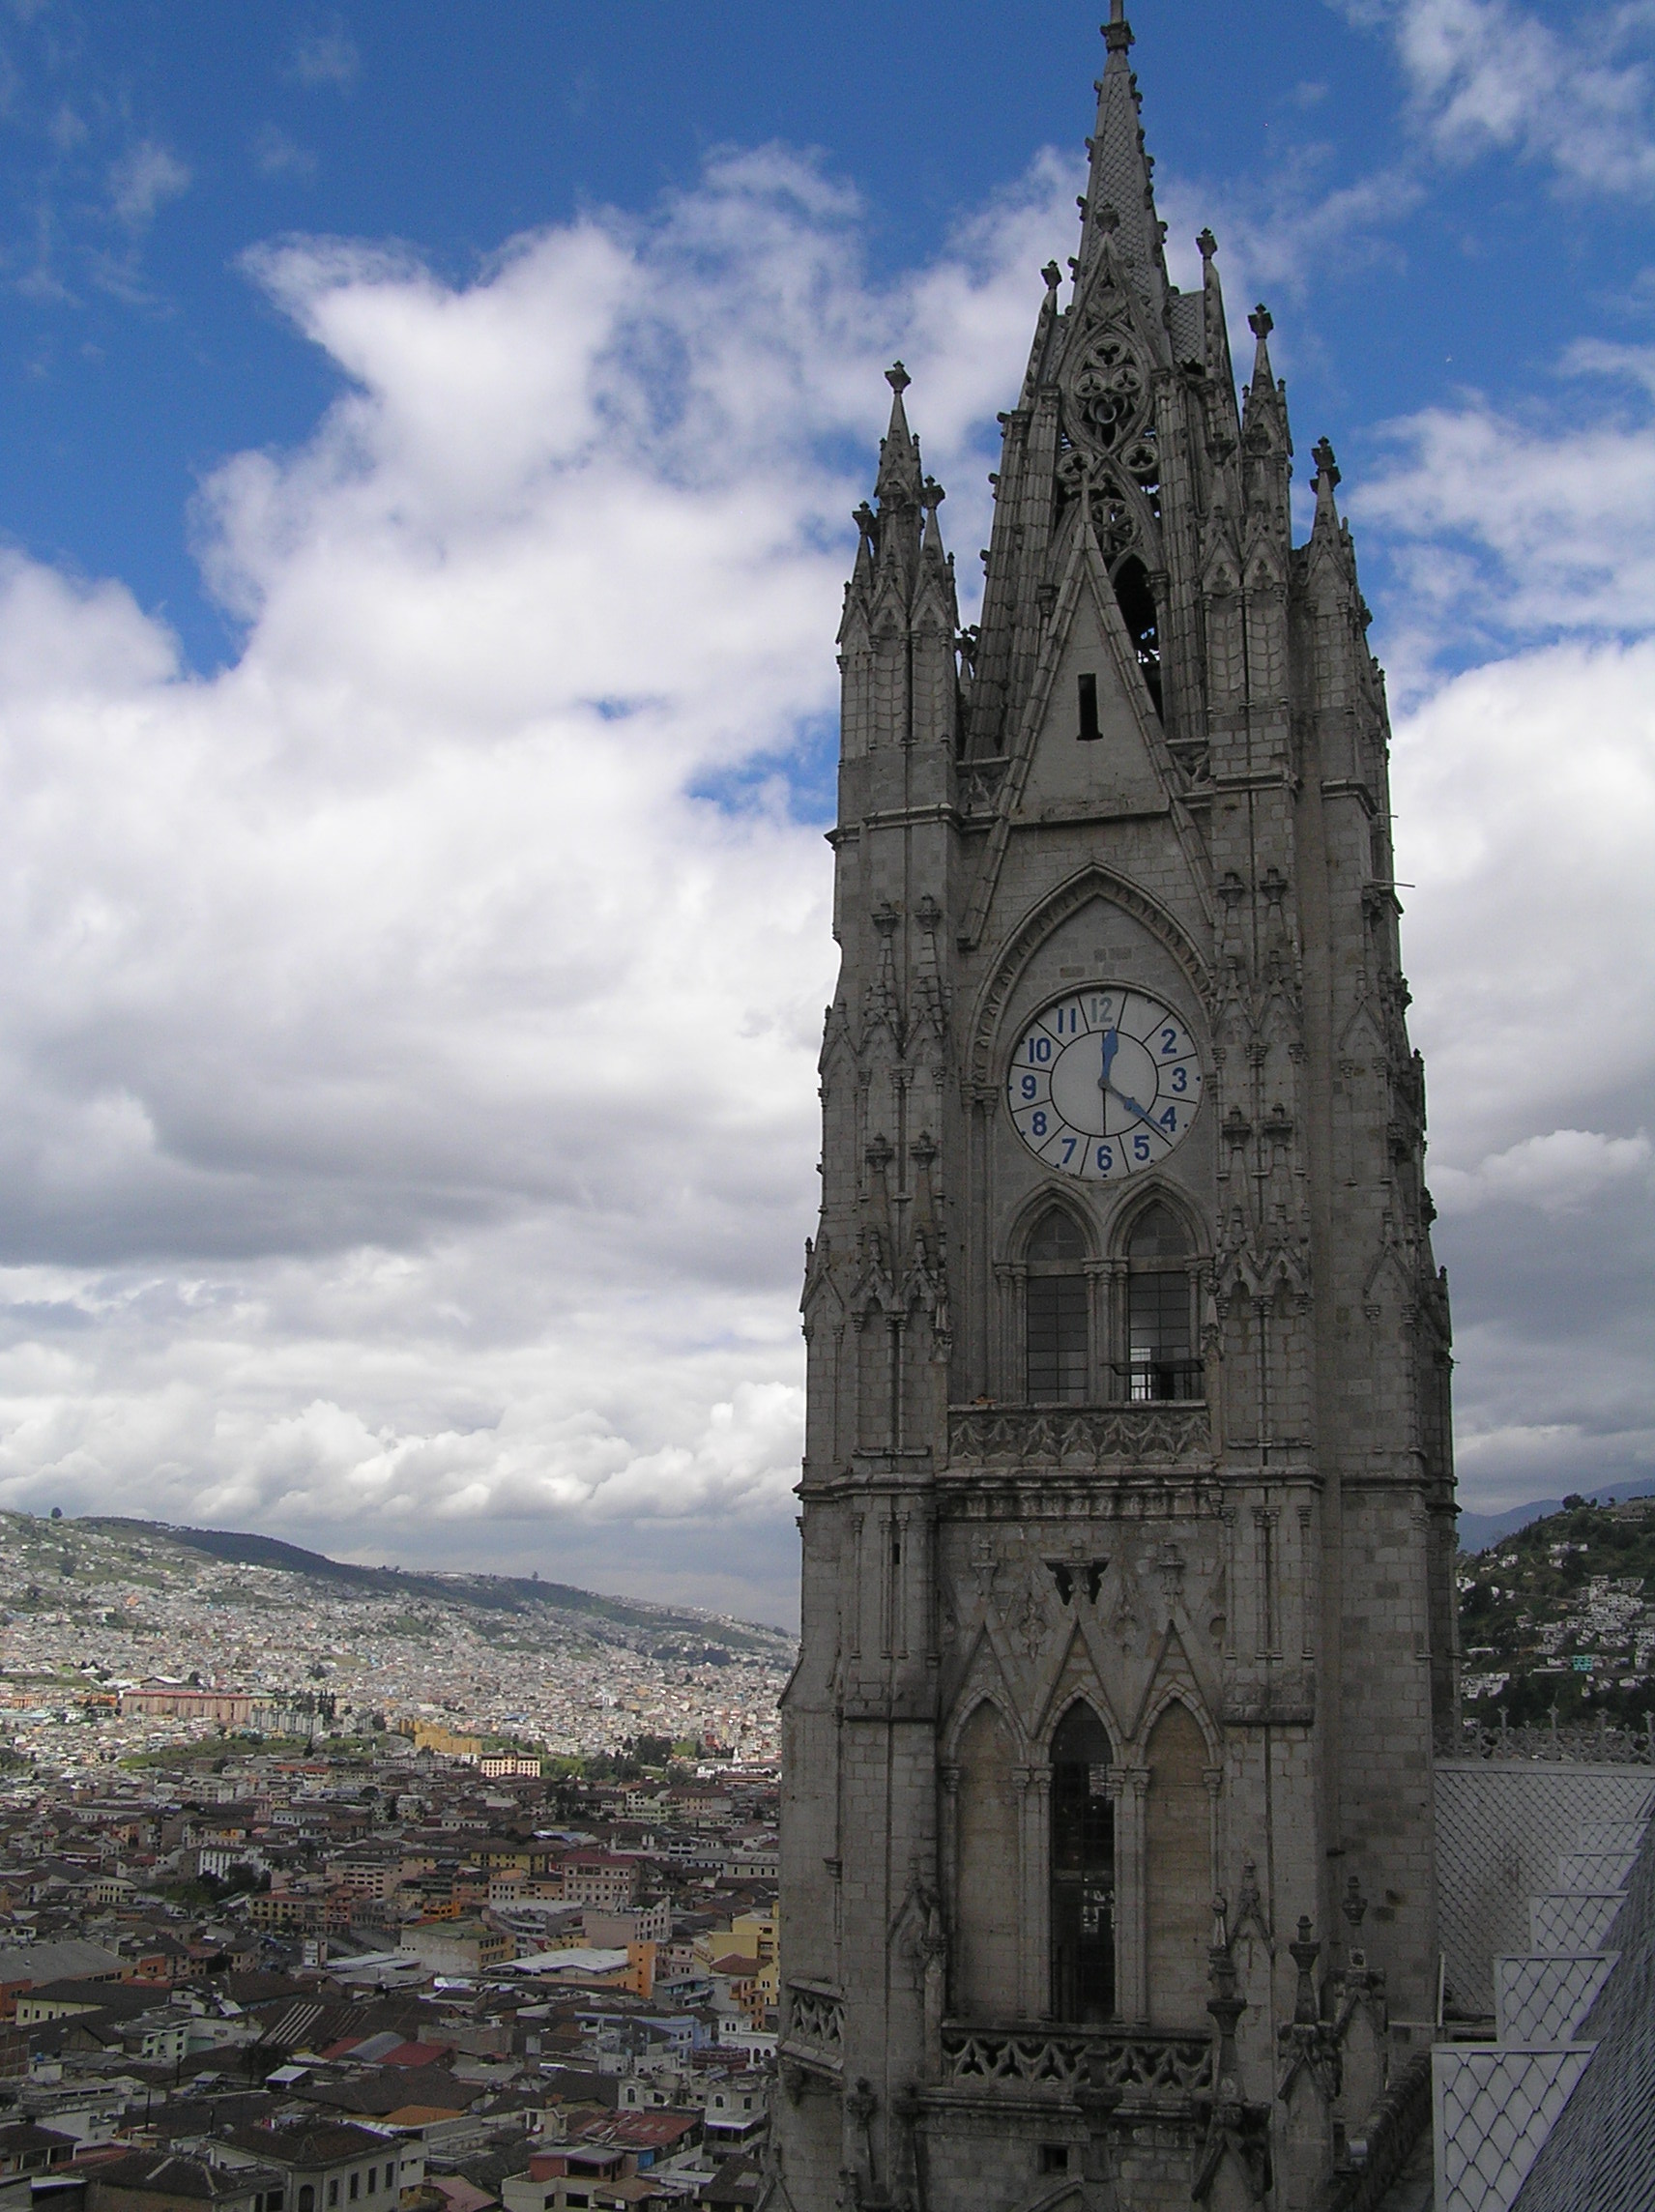 Quito’s Best View!